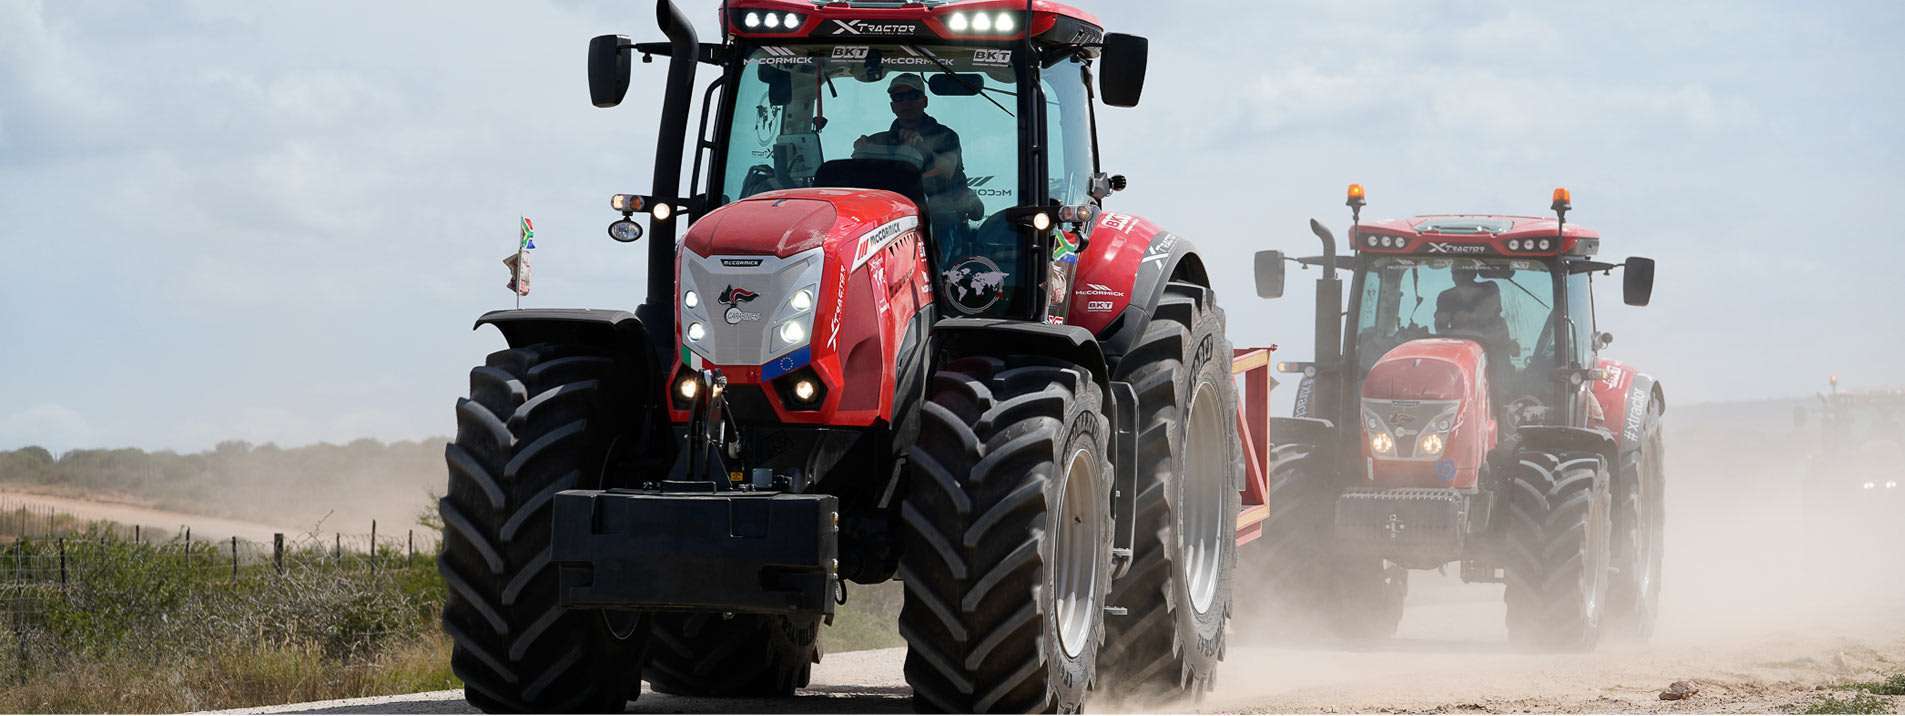 Mccormick Tractors & Spare Parts For Sale | Tractor Services Canterbury Banner